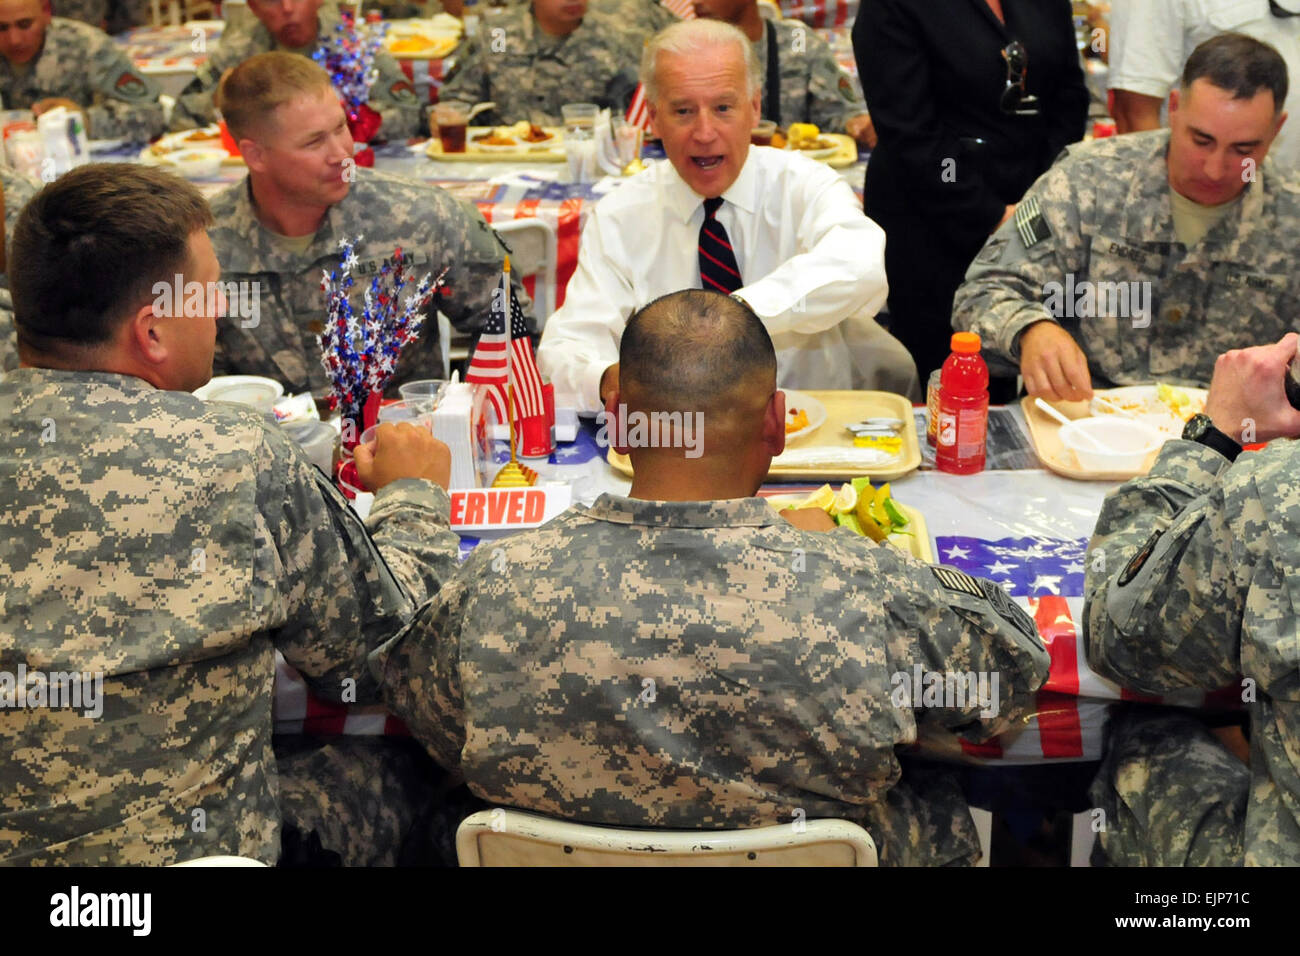 Vice President Joe Biden eats lunch and chats with soldiers at the Sports  Oasis dining facility on Camp Victory, Iraq, July 4, 2010. Biden and his  wife, Dr. Jill Biden, spent Independence